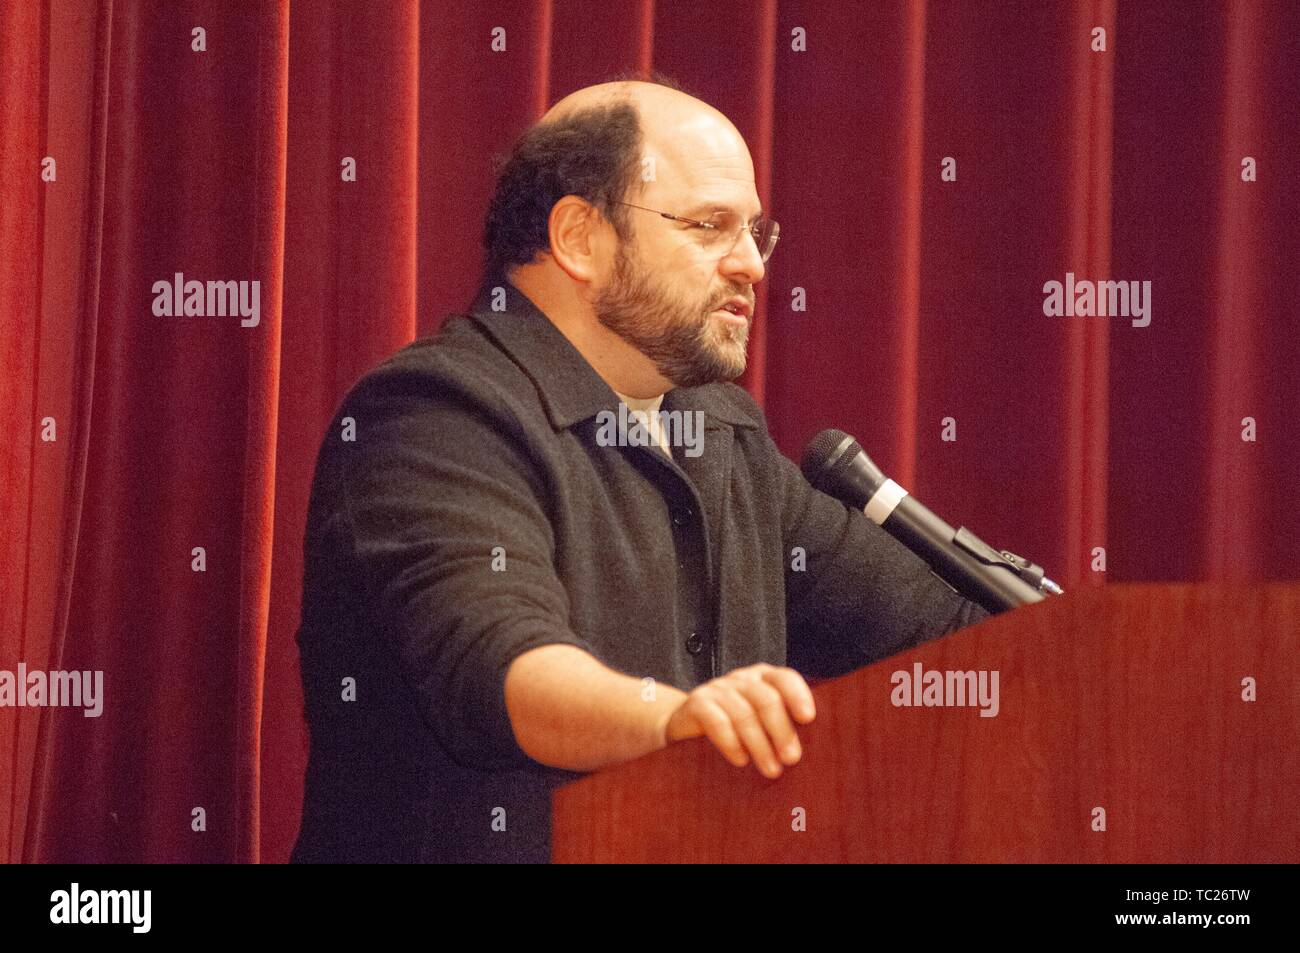 Profile shot of actor and comedian Jason Alexander speaking from a podium during a Milton S Eisenhower Symposium, Homewood Campus of Johns Hopkins University, Baltimore, Maryland, October 13, 2006. From the Homewood Photography Collection. () Stock Photo